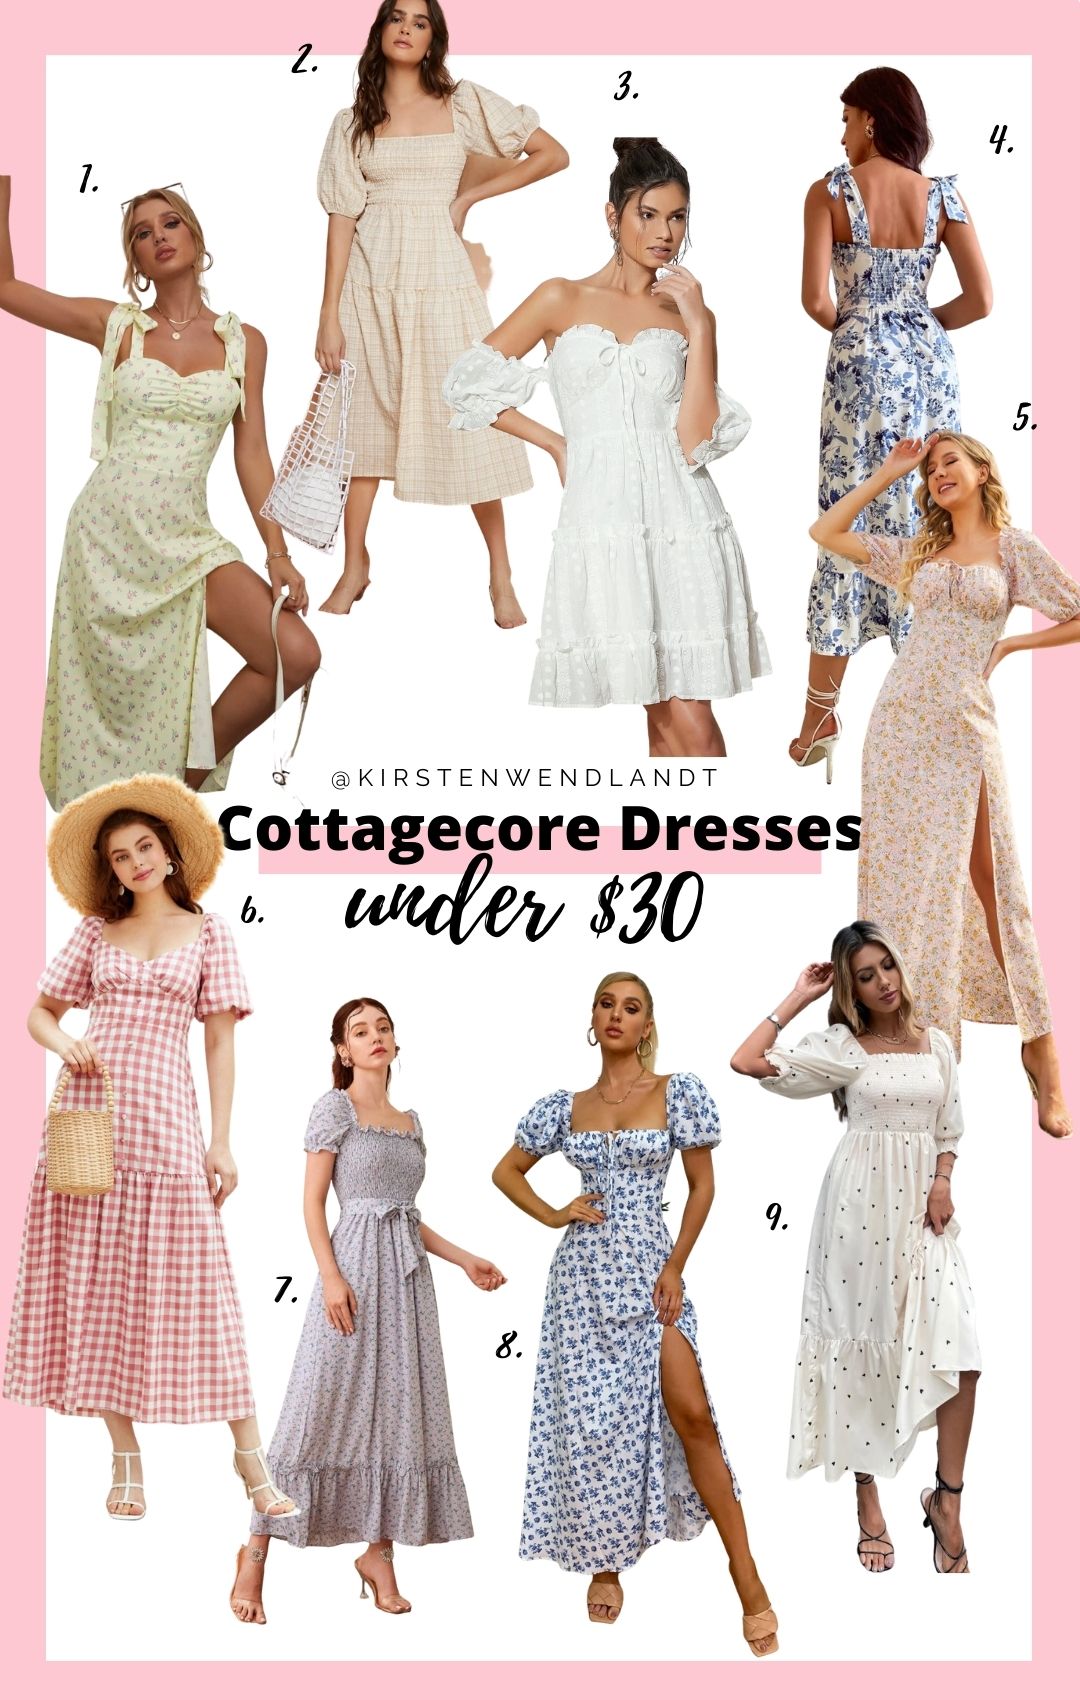 If you're smitten over the cottagecore aesthetic like me you'll definitely love this list list of cheap cottagecore dresses you can buy on a budget! Each of these adorable cottagecore dresses are $30 or under